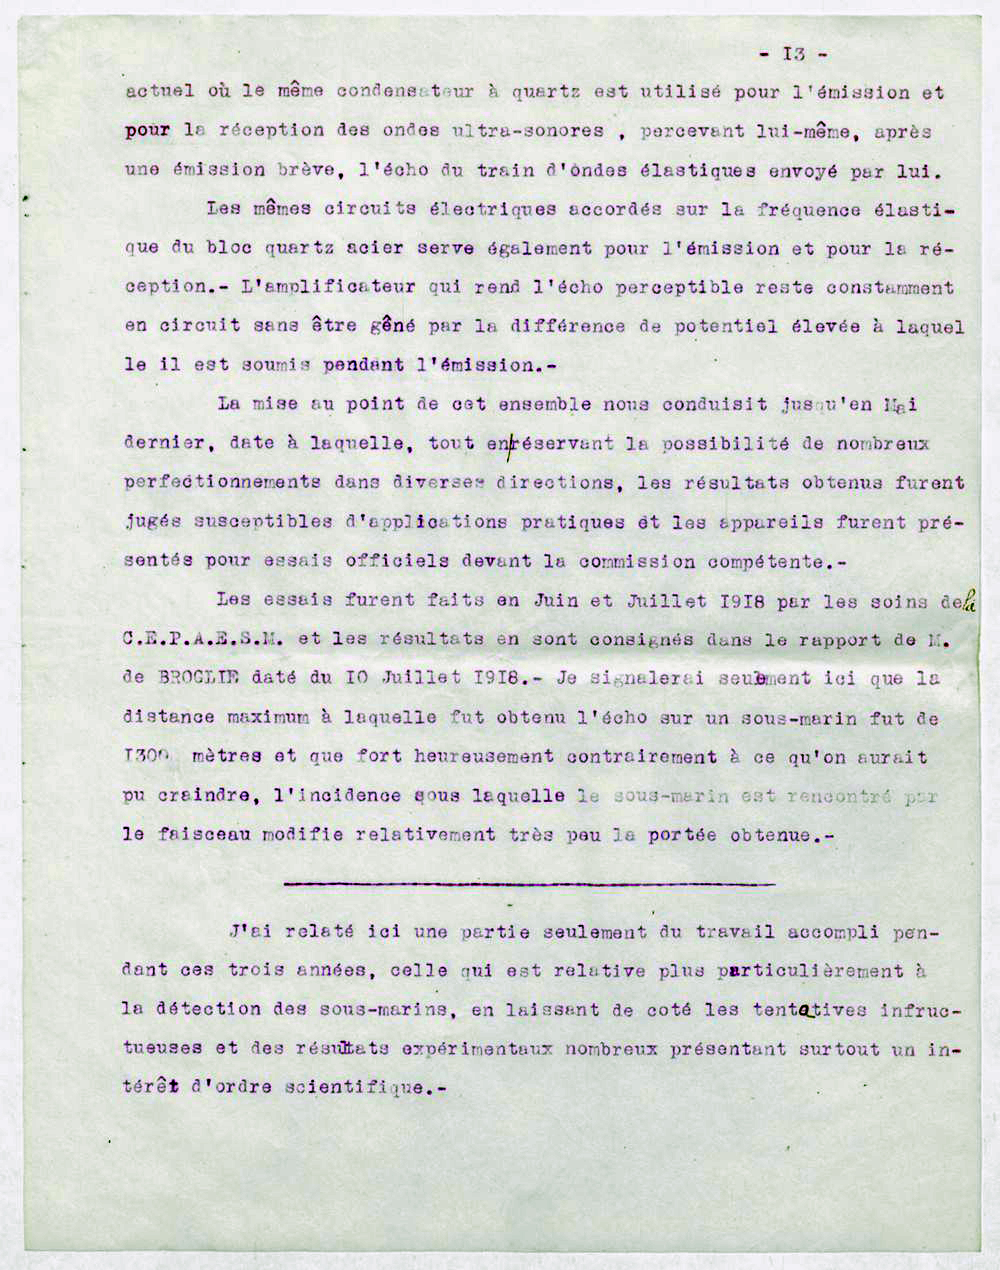 Interallied conference 1918 Page 13.jpg